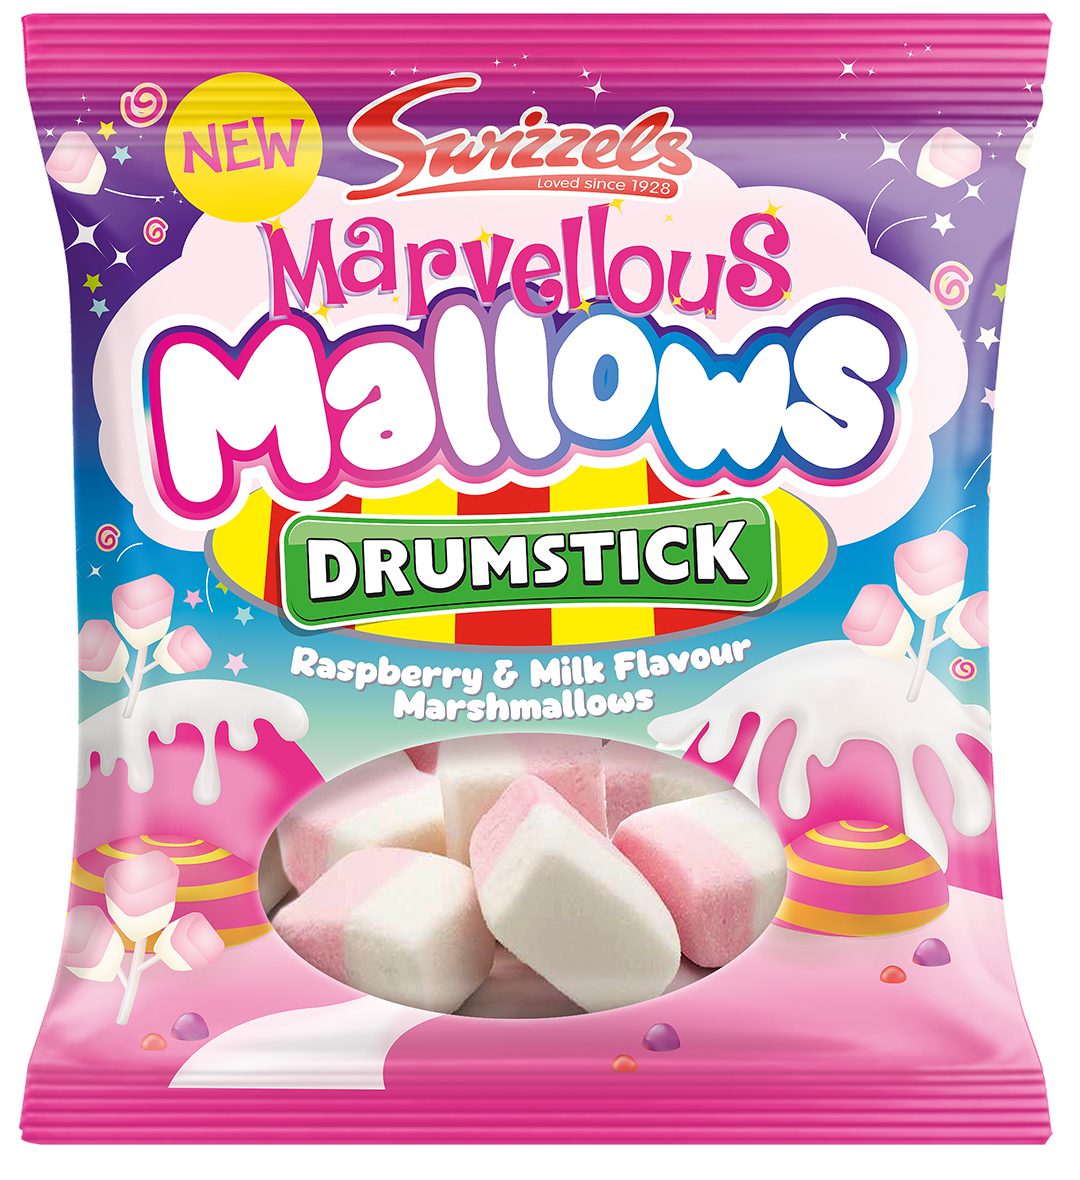 Swizzels Marvellous Mallows marshmallows sweets that come in Raspberry & Milk flavour